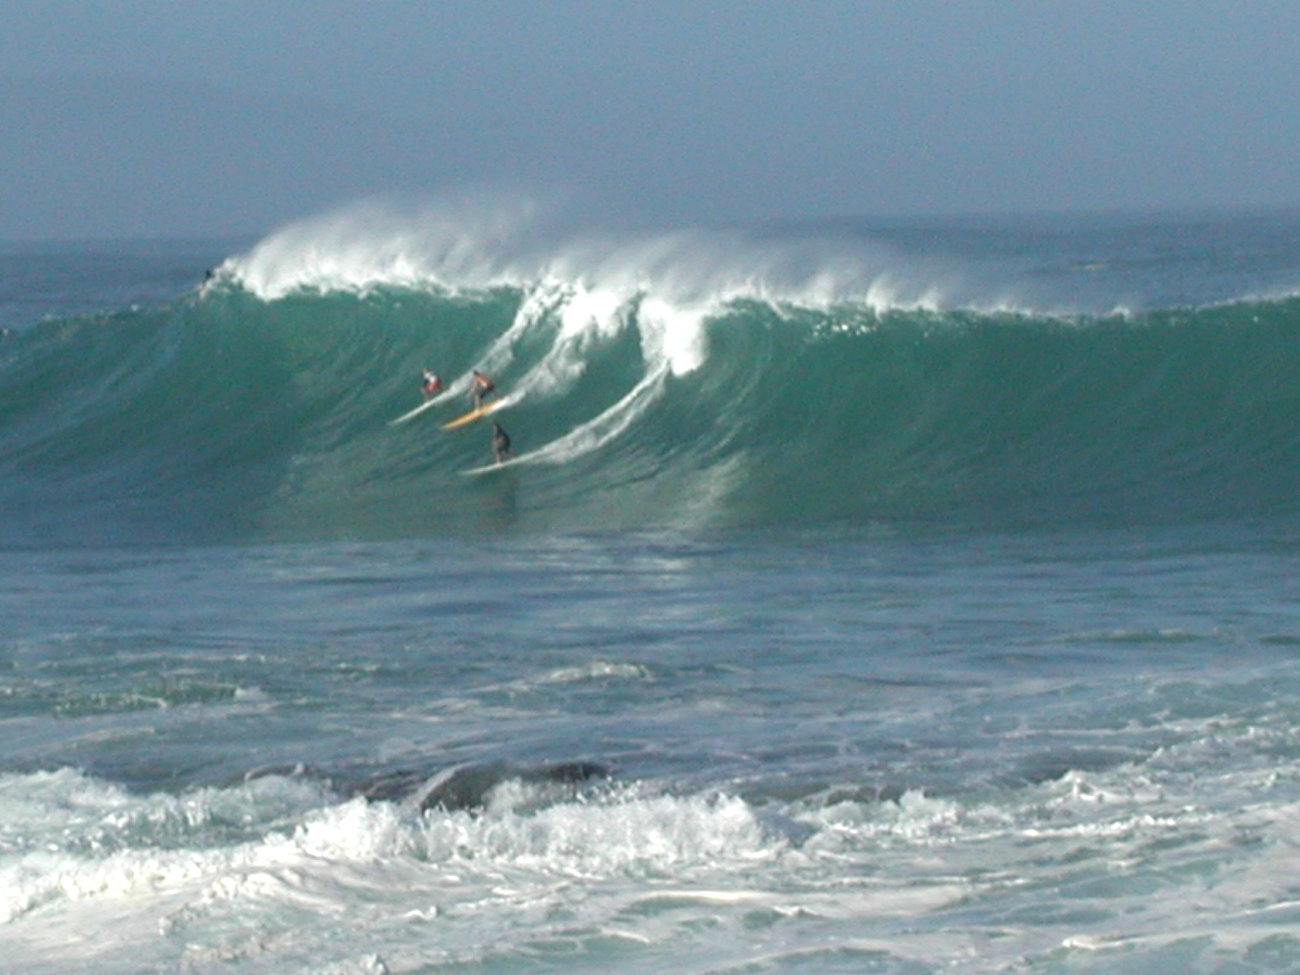 Huge surf with an offshore wind on Oahu's North Shore